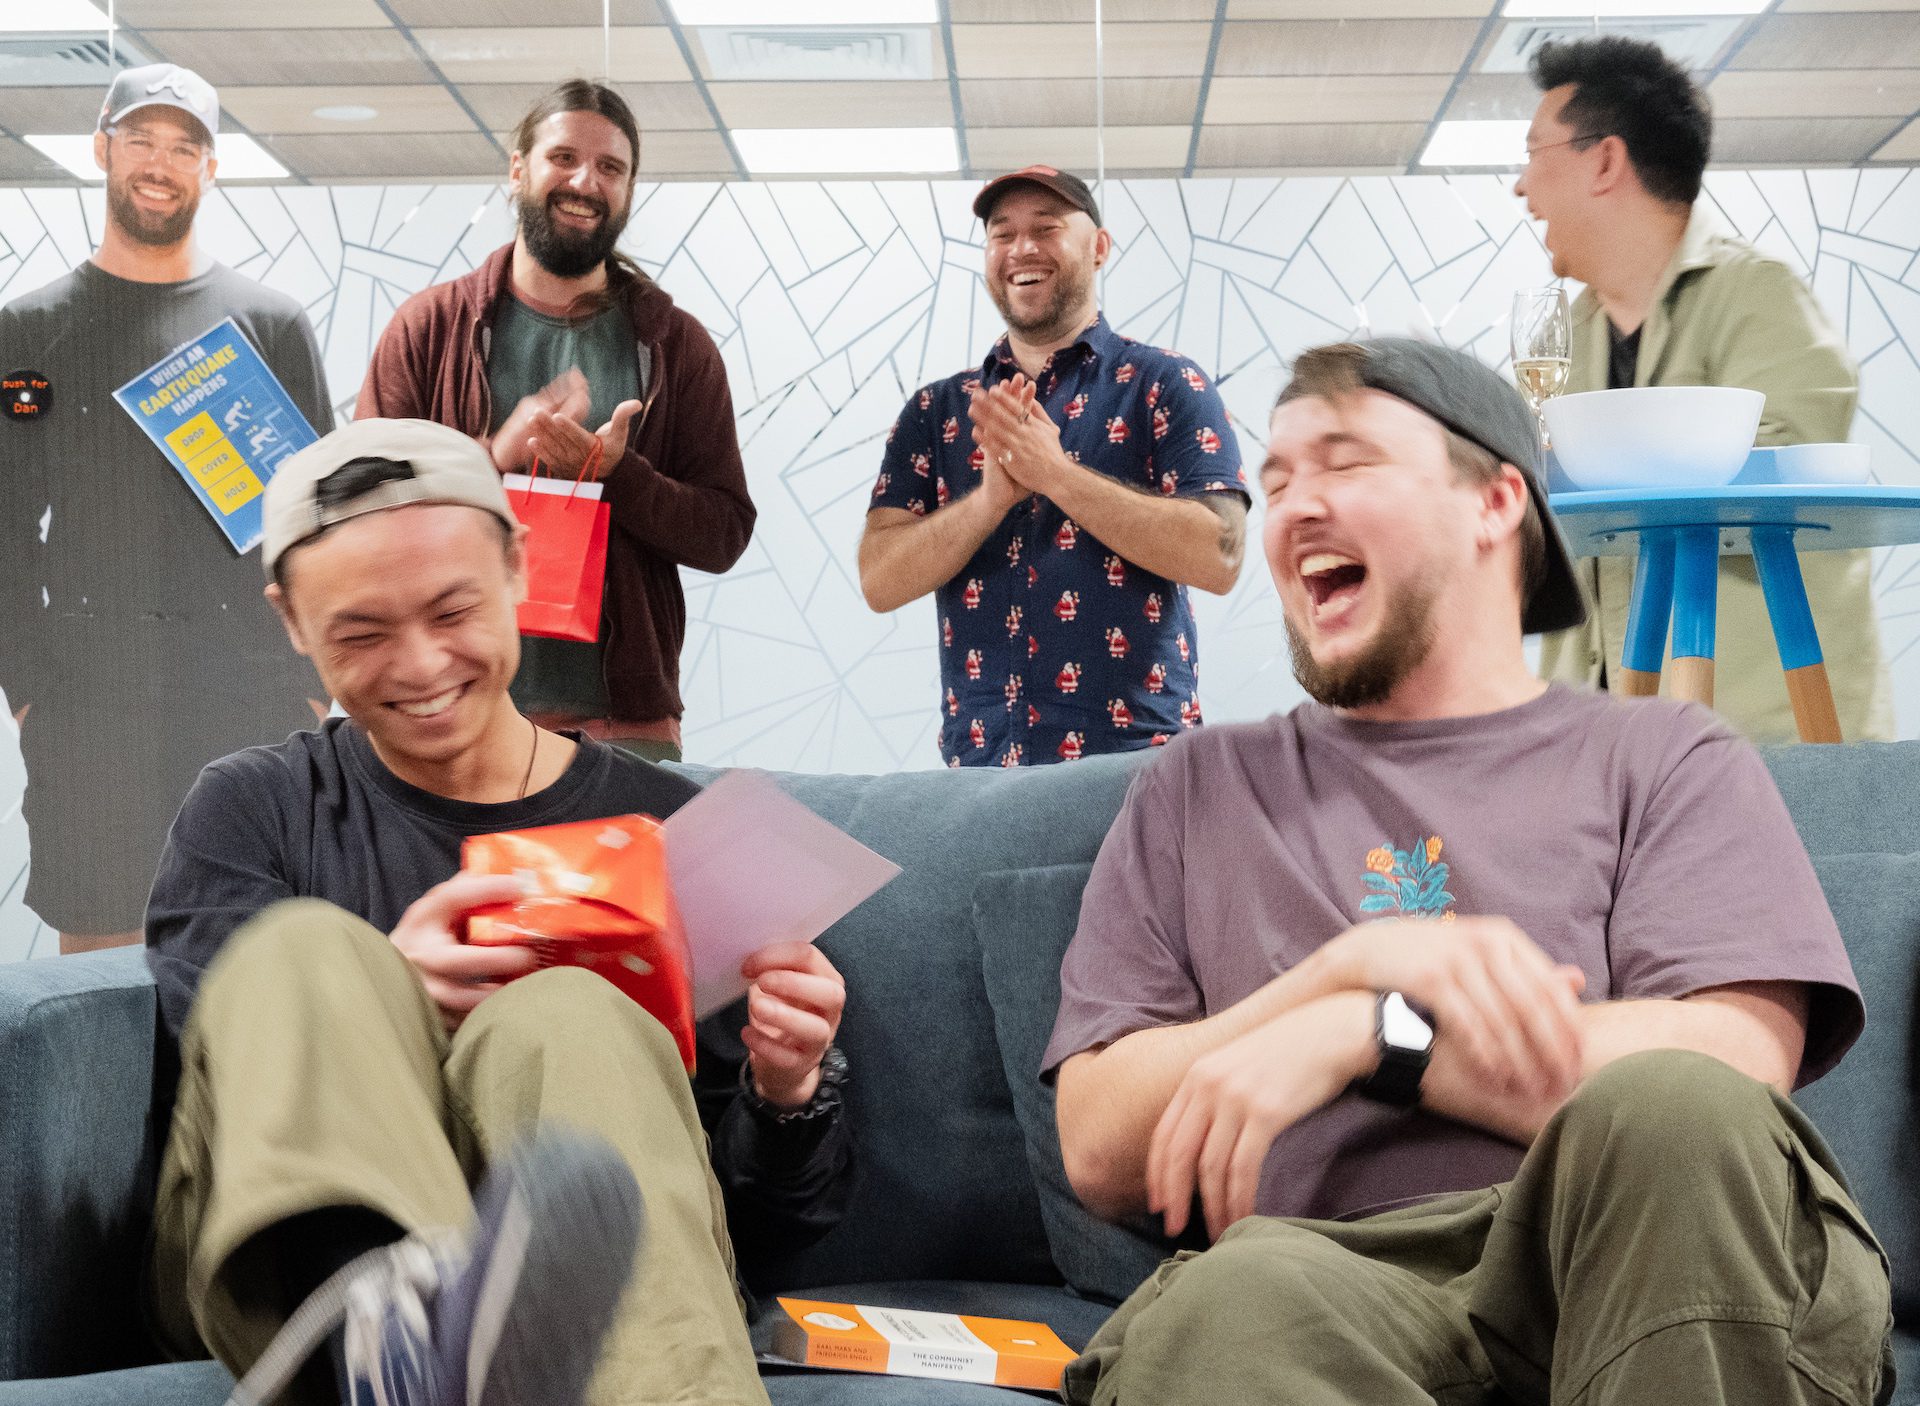 The PaperKite team share a laugh at Merry Gratitudes.